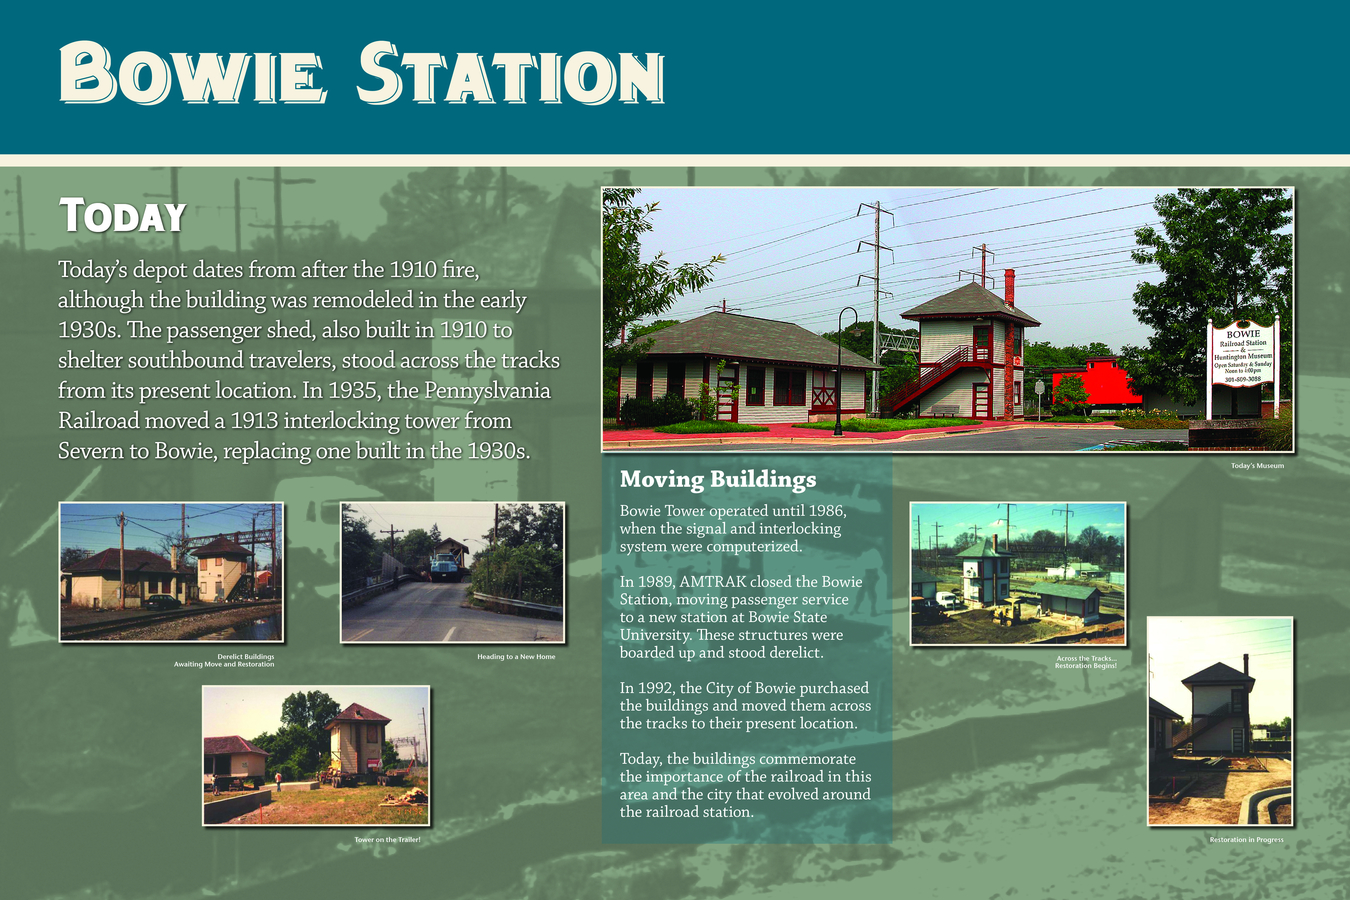 3 BOW WLCM PNLS : Bowie Station has been moved across the tracks for historic preservation